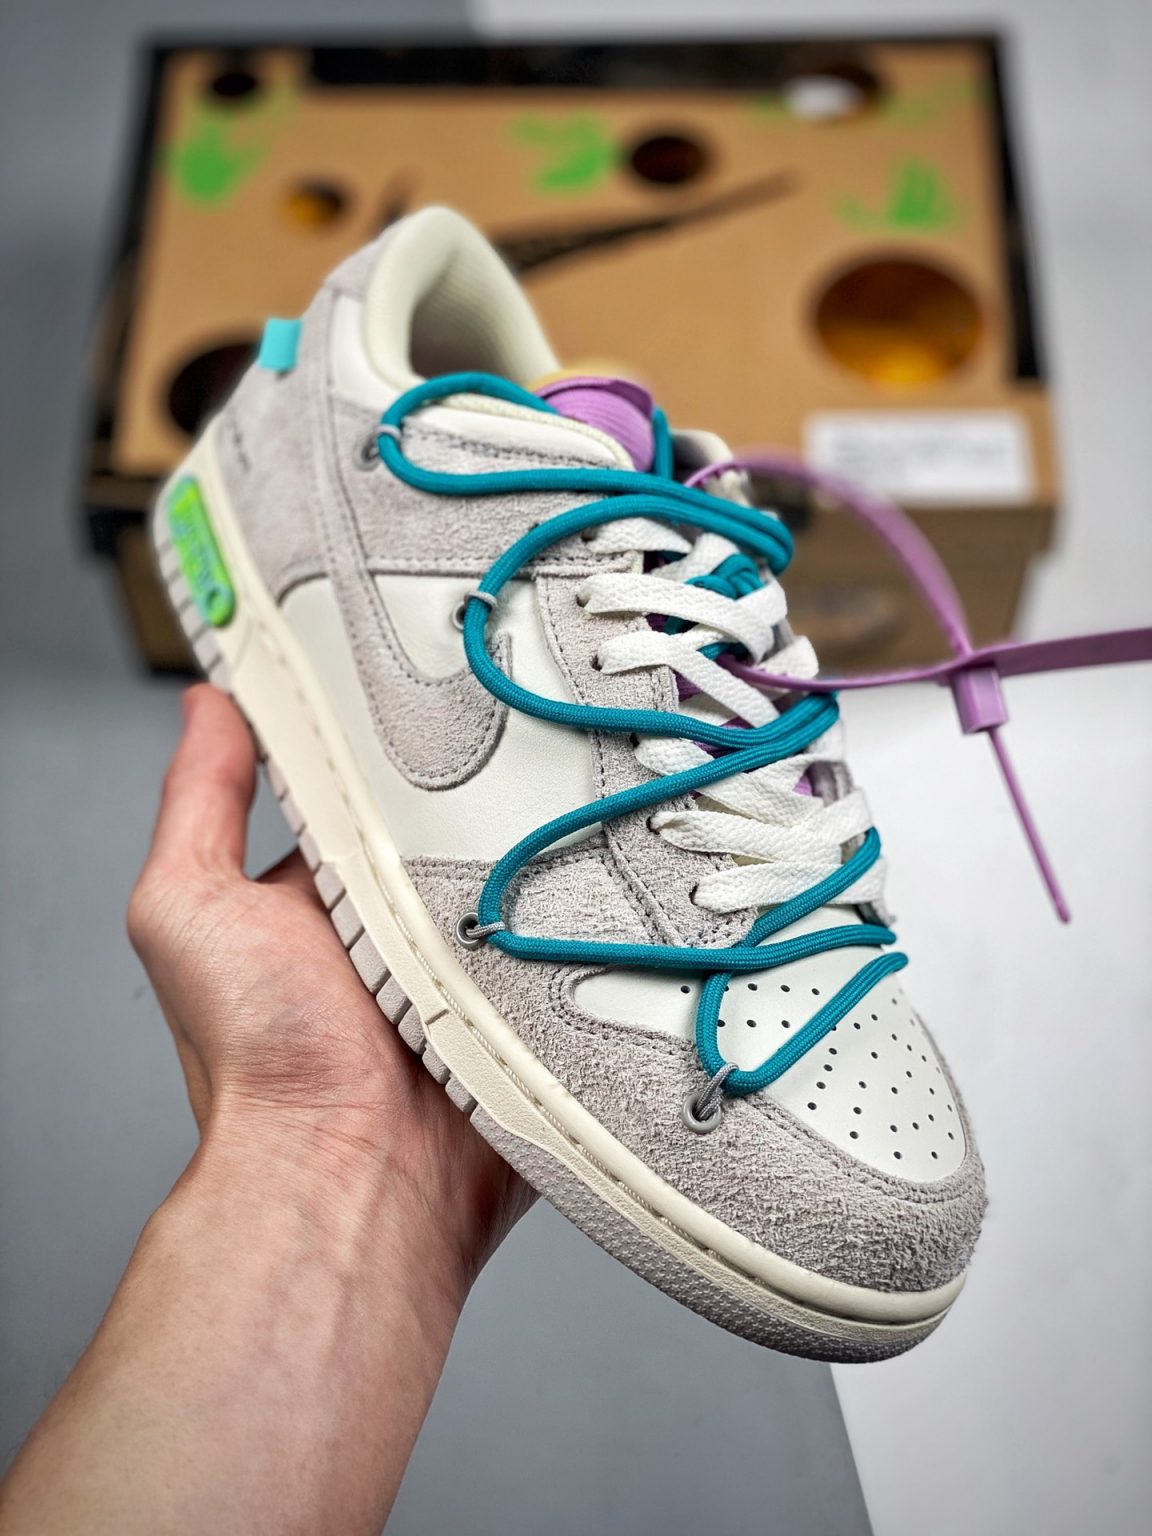 Off-White x Nike Dunk Low “36 of 50” Sail/Neutral Grey/Energy For Sale ...